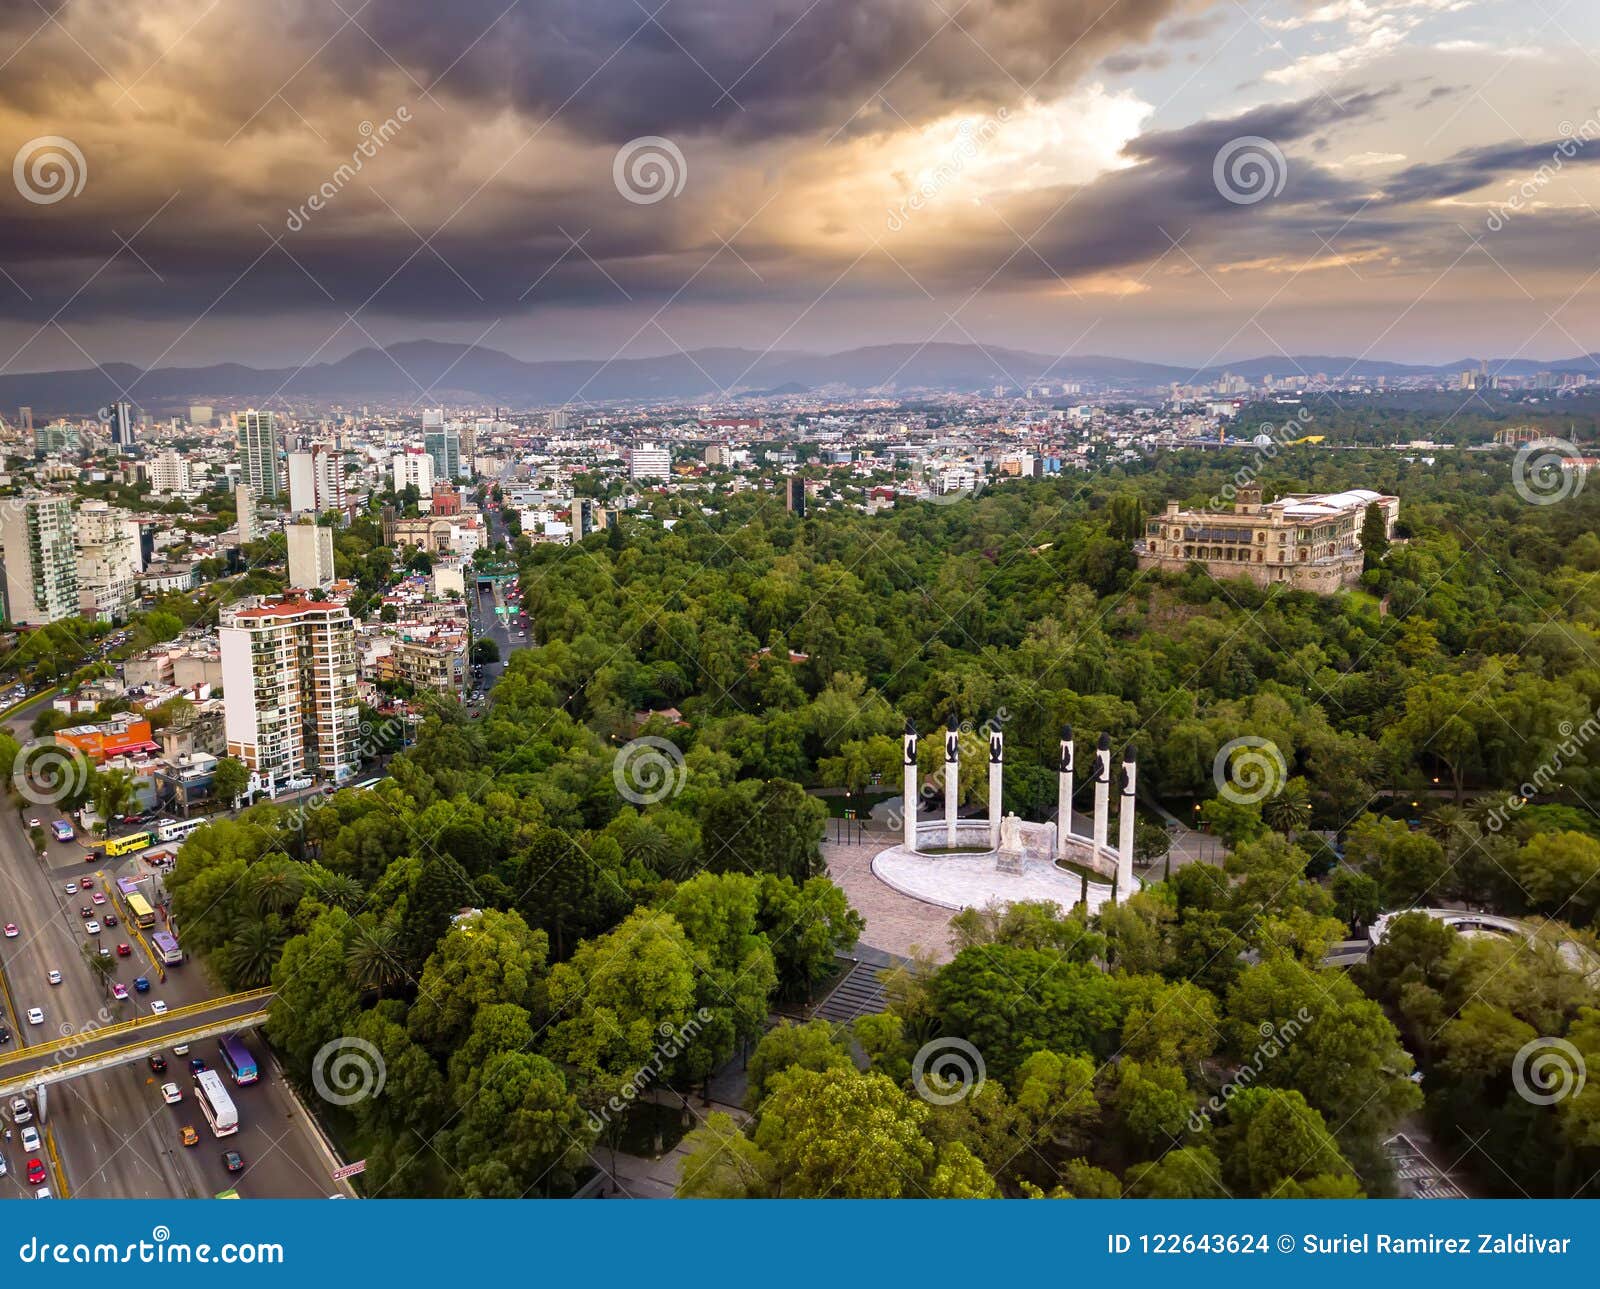 mexico city - chapultepec castle panoramic view - sunset